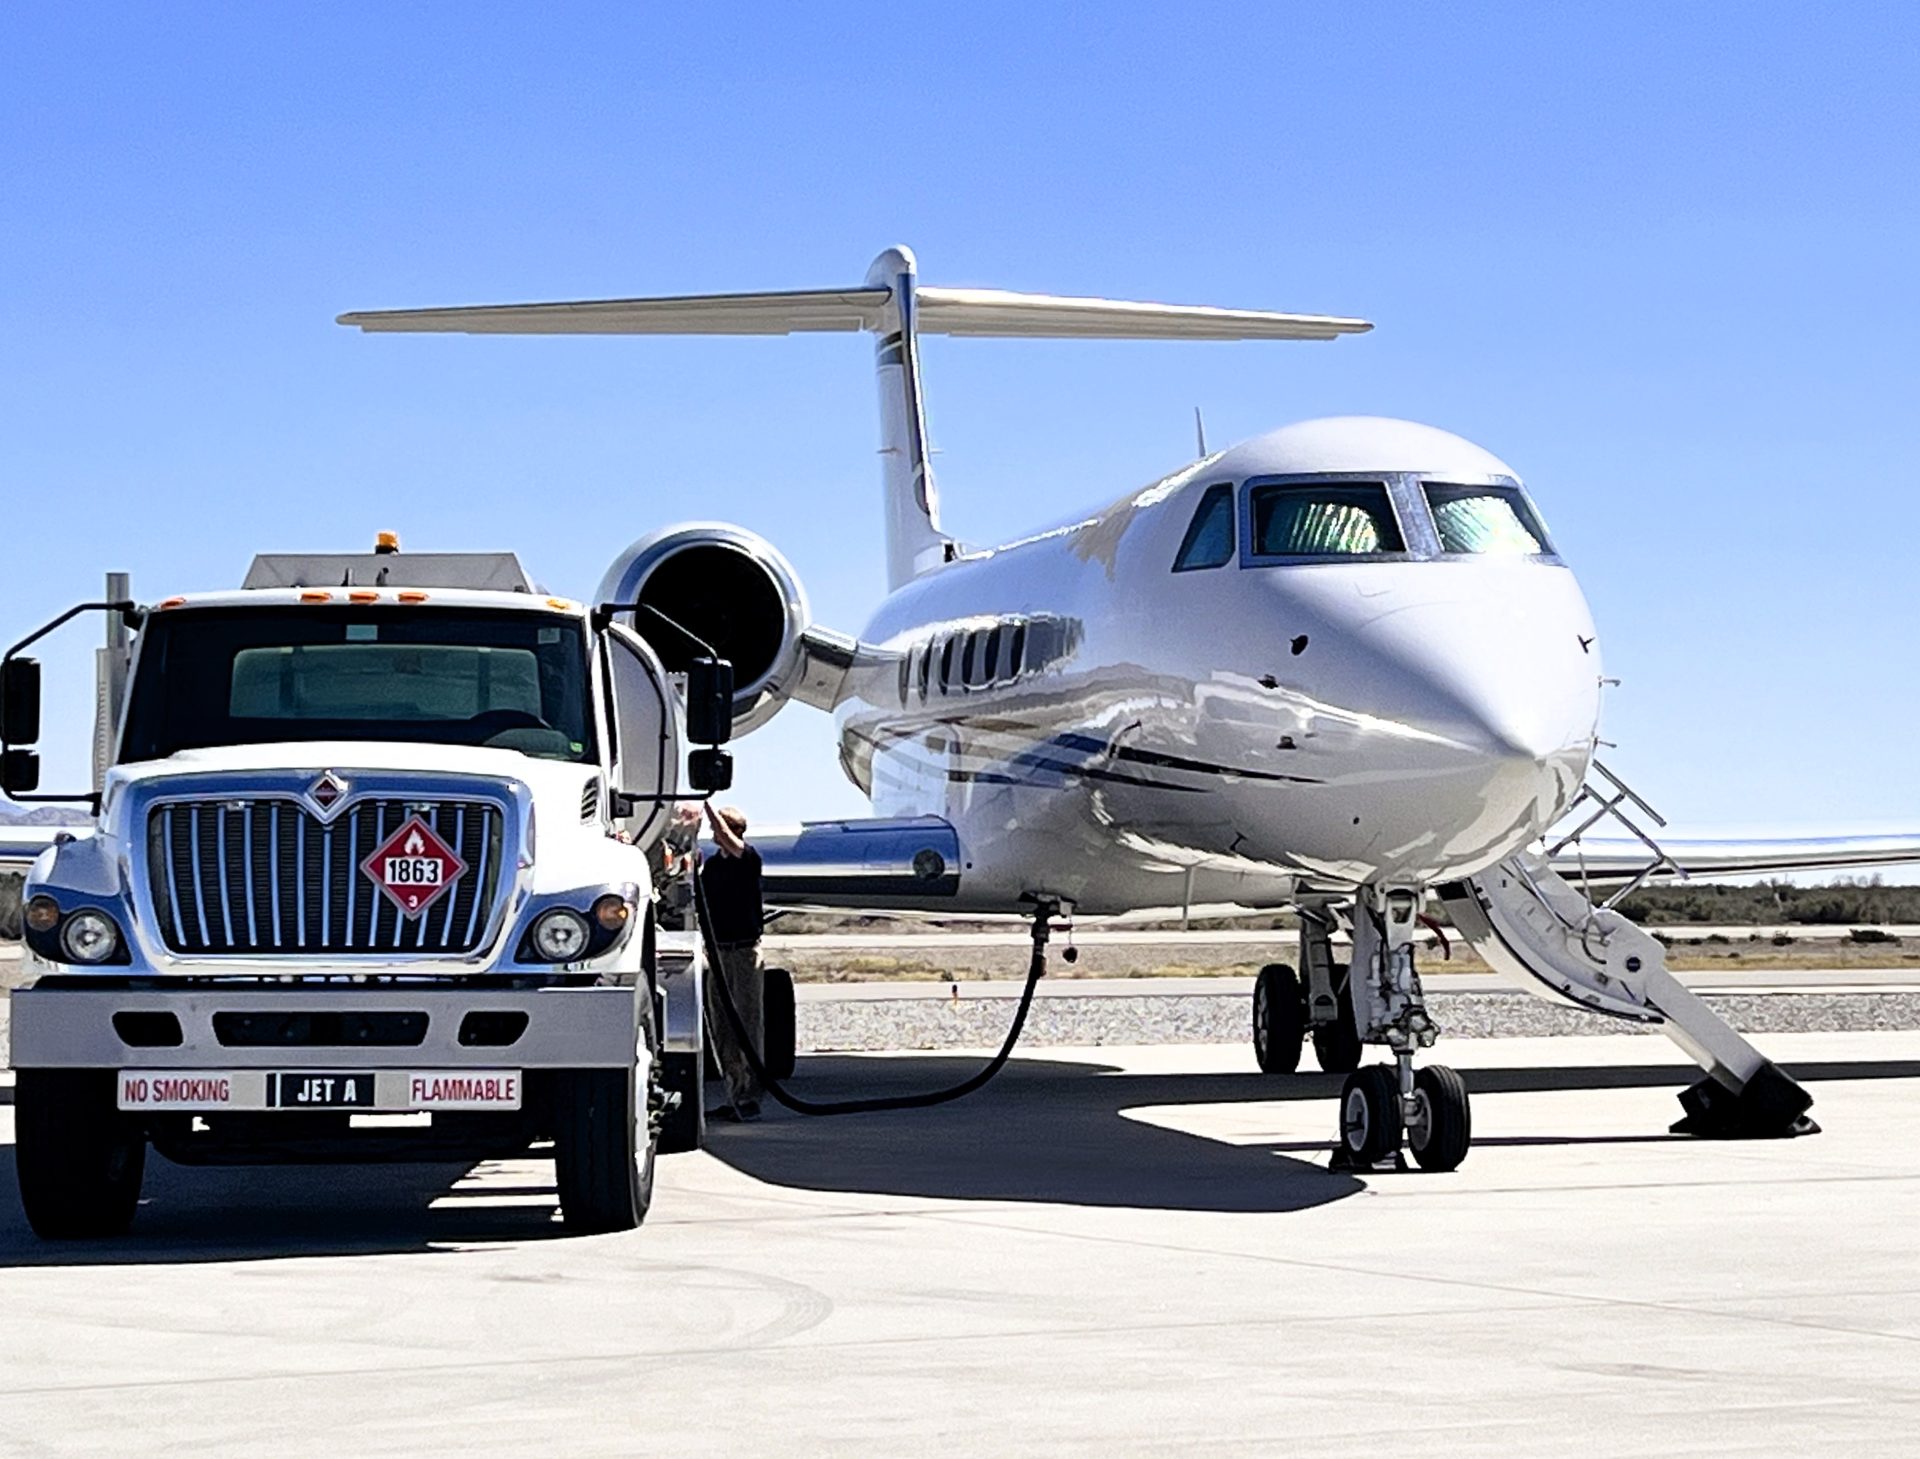 Desert Jet | Desert Jet Partners with TITAN Aviation Fuels to Offer Sustainable Aviation Fuel (SAF) at its KTRM FBO